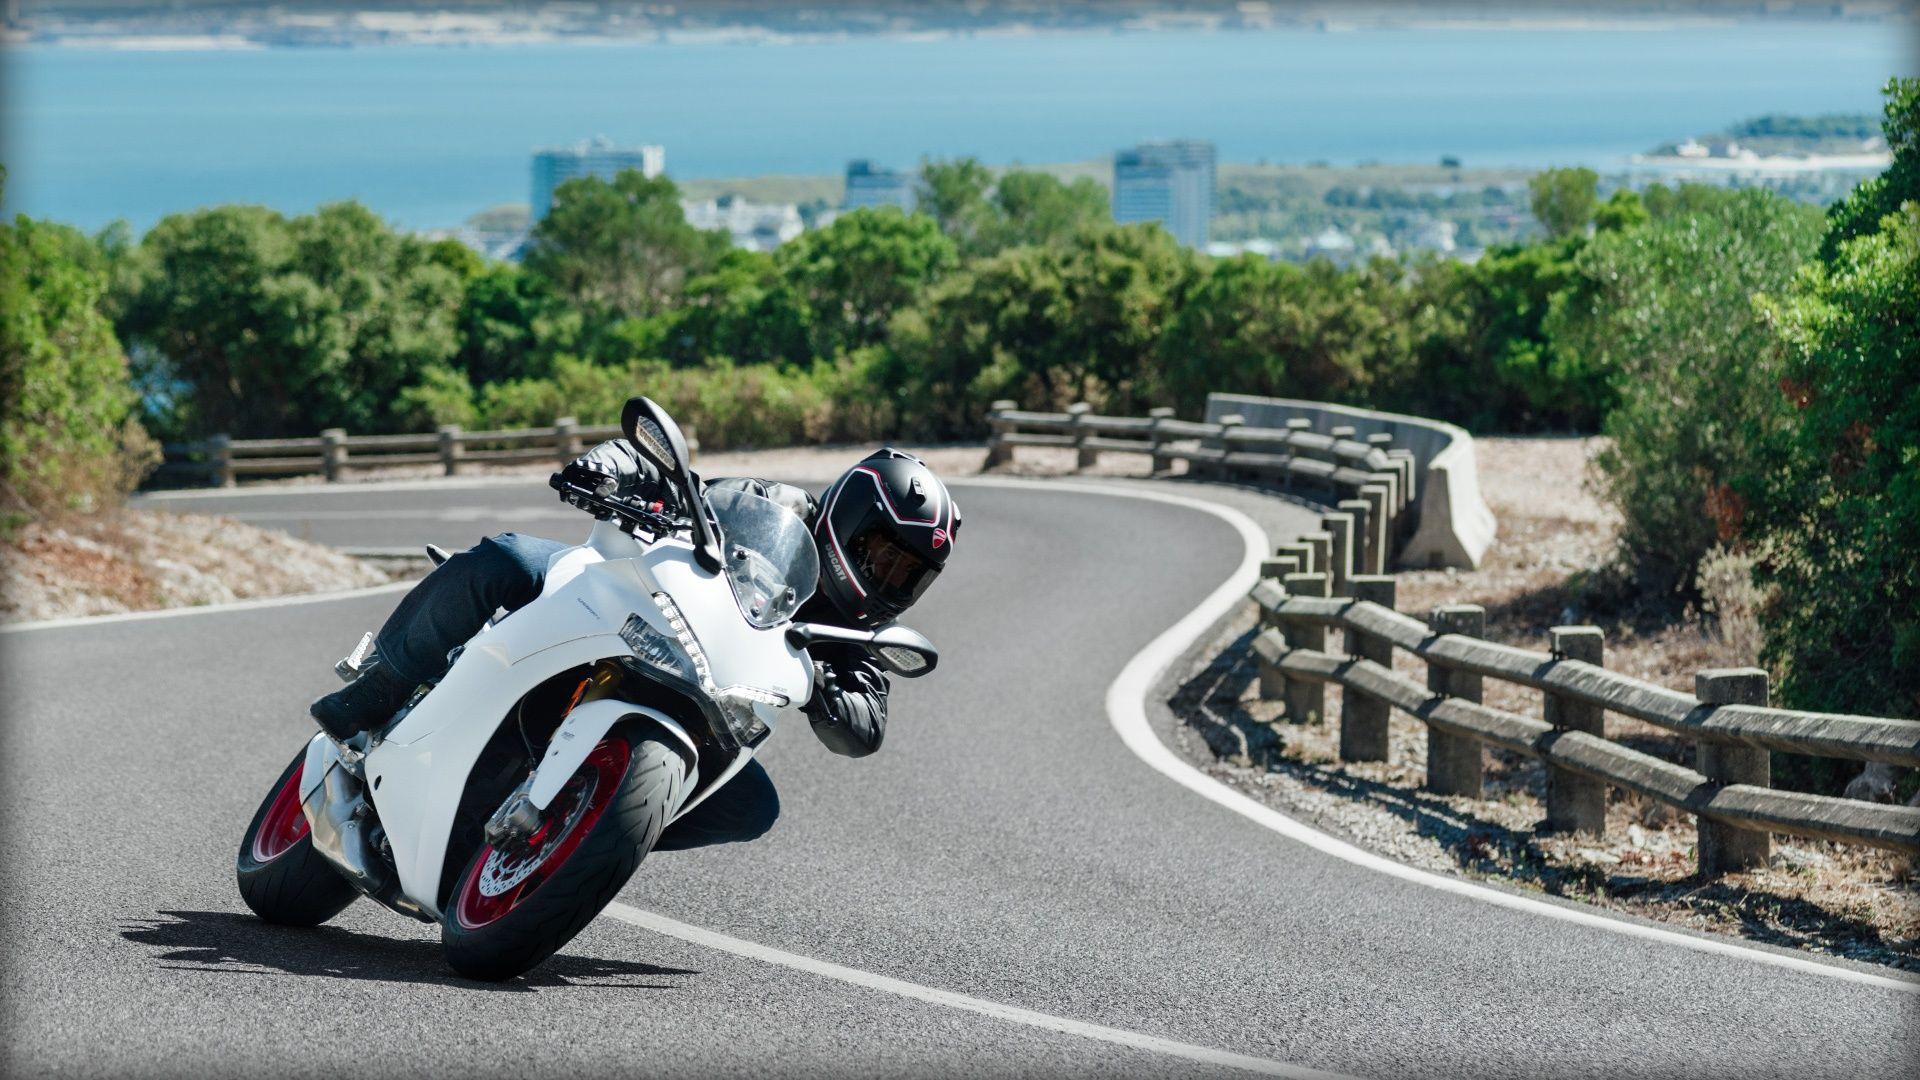 Photos of the 939 SuperSport S Riding on Twisty Roads